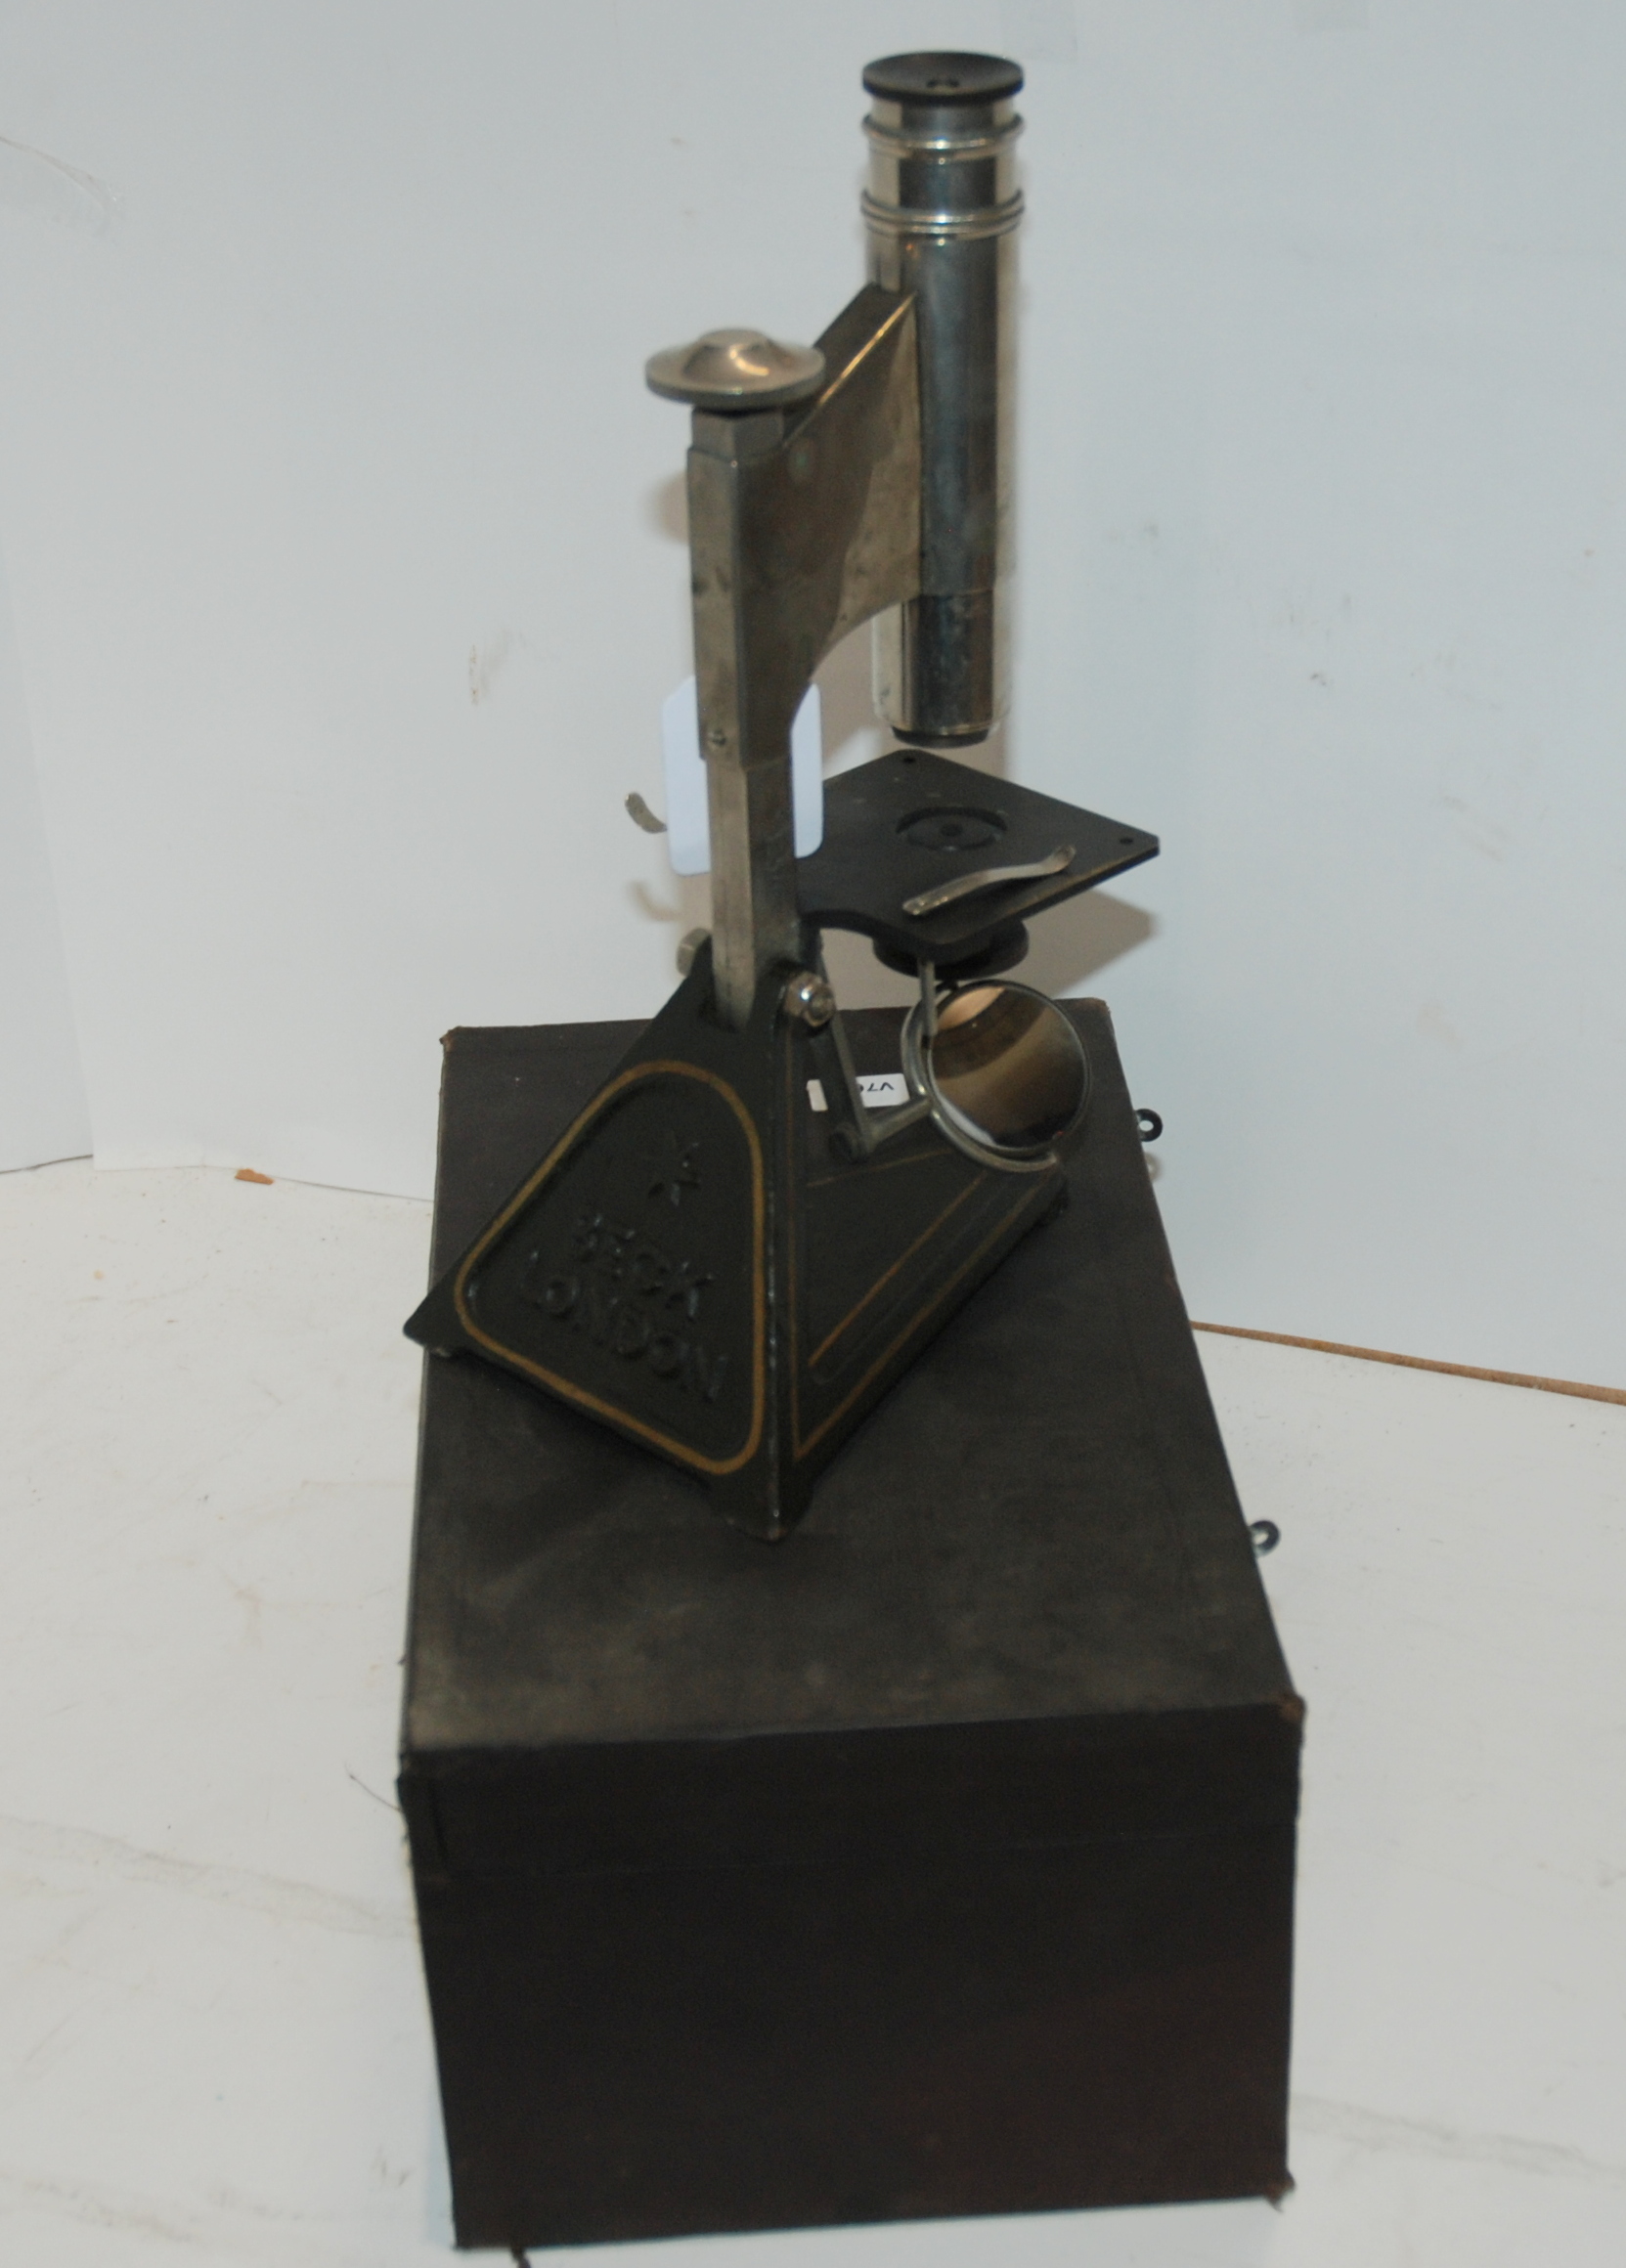 A Beck "Star" microscope in original case Provenance: The Late Dr Helen. E. C. Cargill Thompson